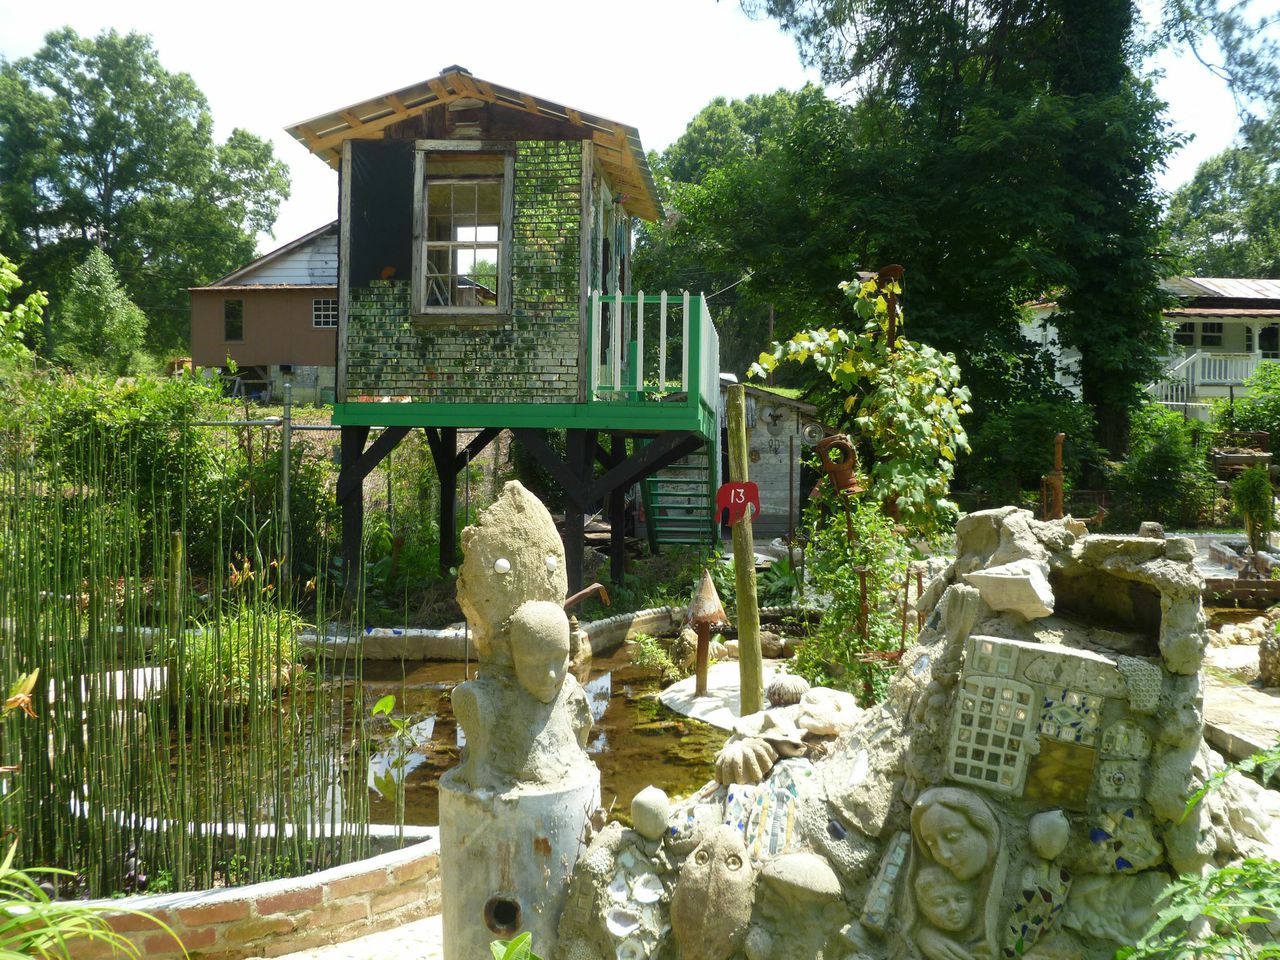 Sunny view of Howard Finster's Paradise garden filled with green trees and wild sculptures